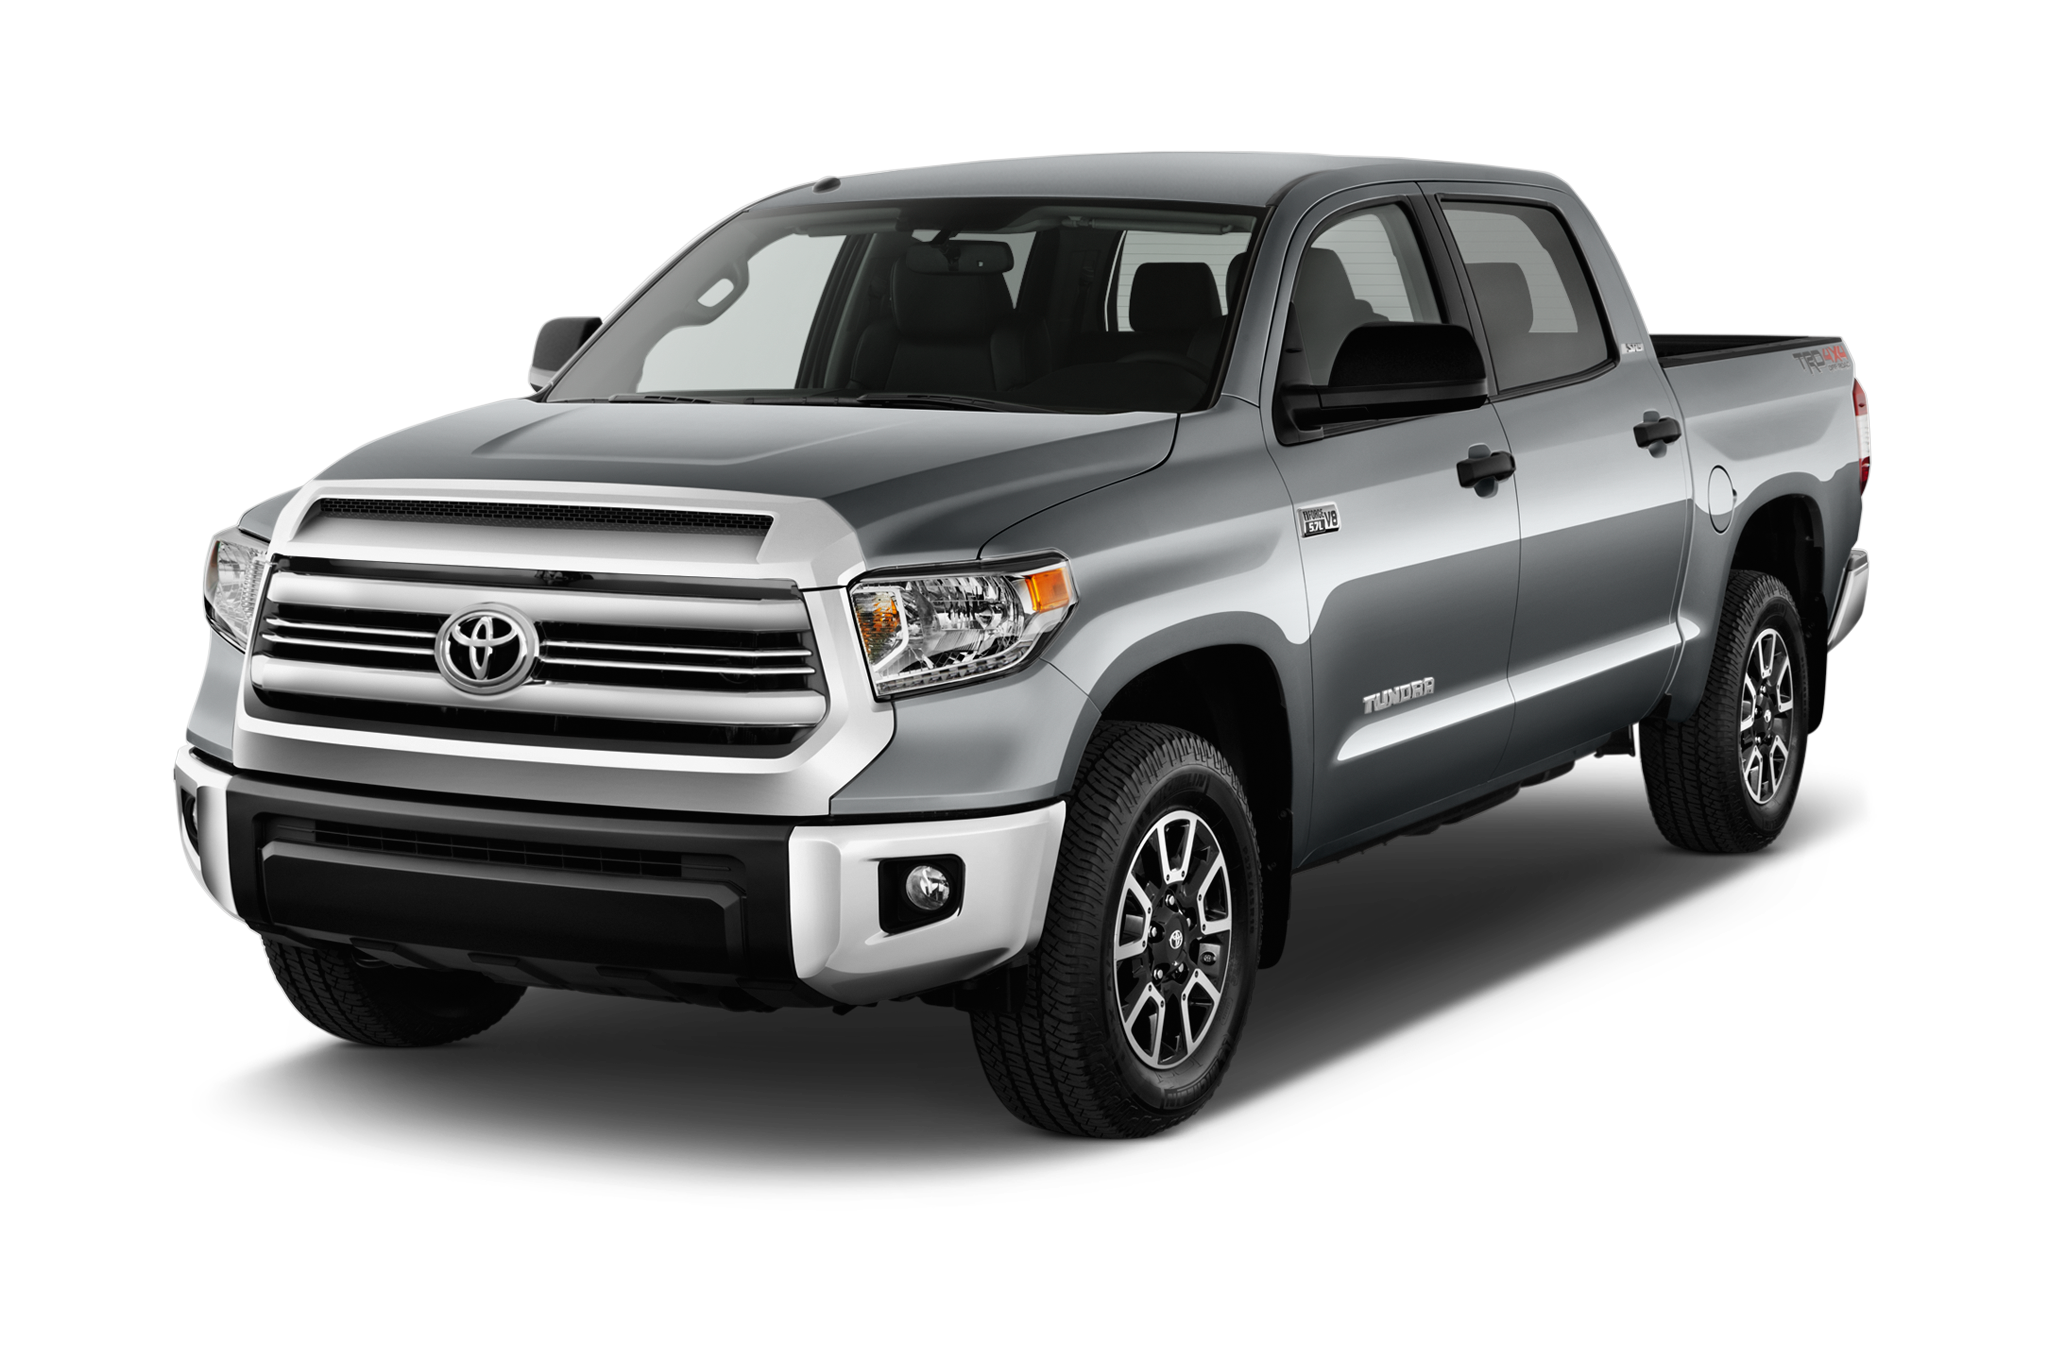 2017 Toyota Tundra TRD Pro 5.7L 4WD Crew Max Short Bed Overview - MSN Autos